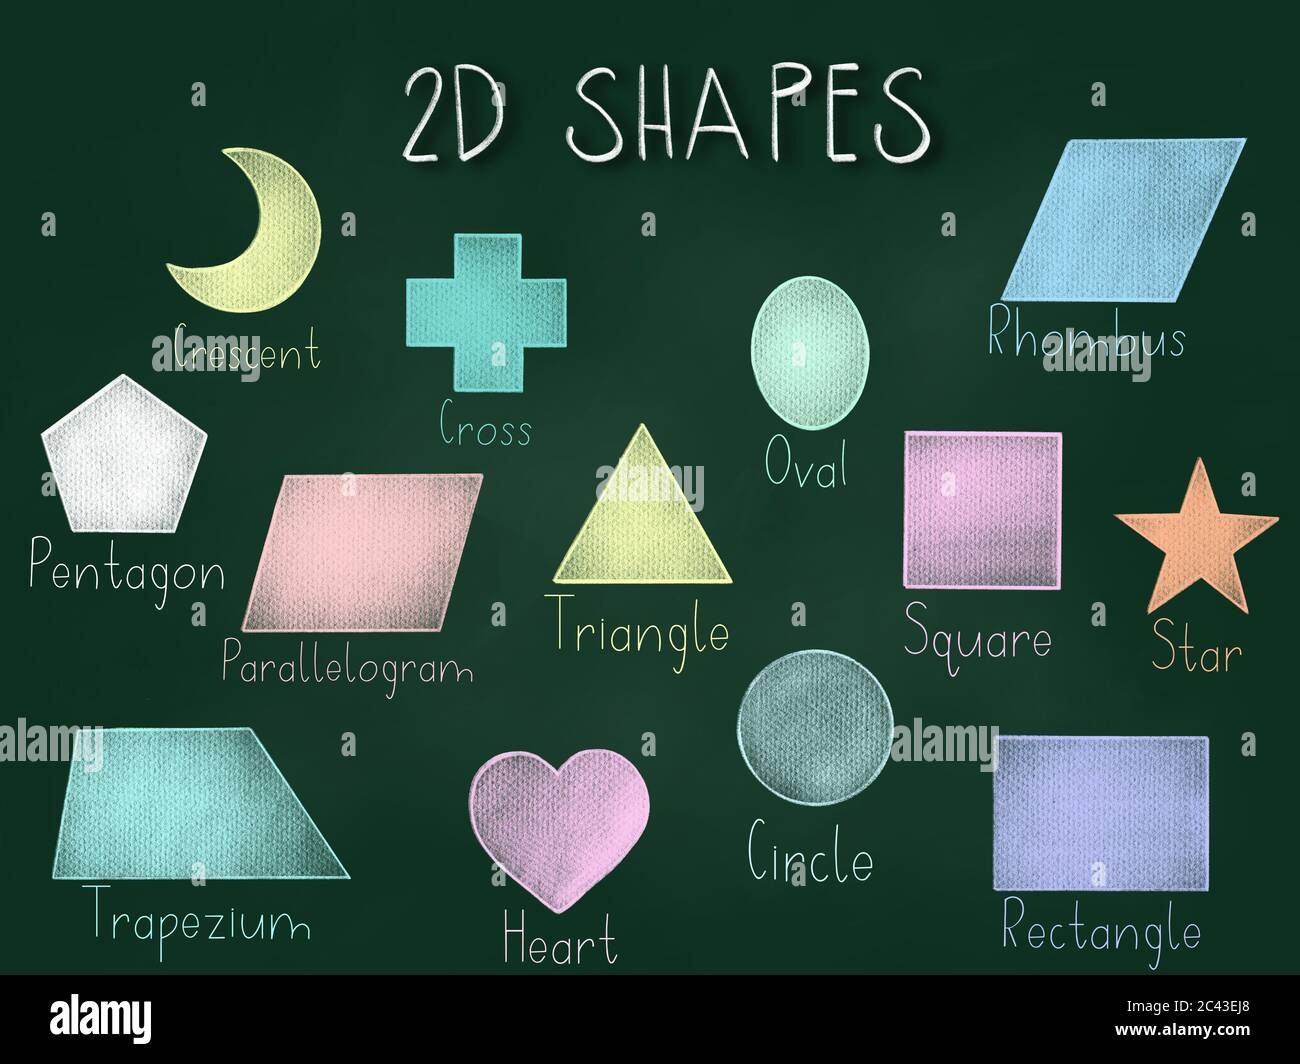 2d shapes colourful chalk drawing on a chalkboard, square, rectangle, circle, pentagon, rhombus, parallelogram, triangle, oval, crescent, cross, star Stock Photo